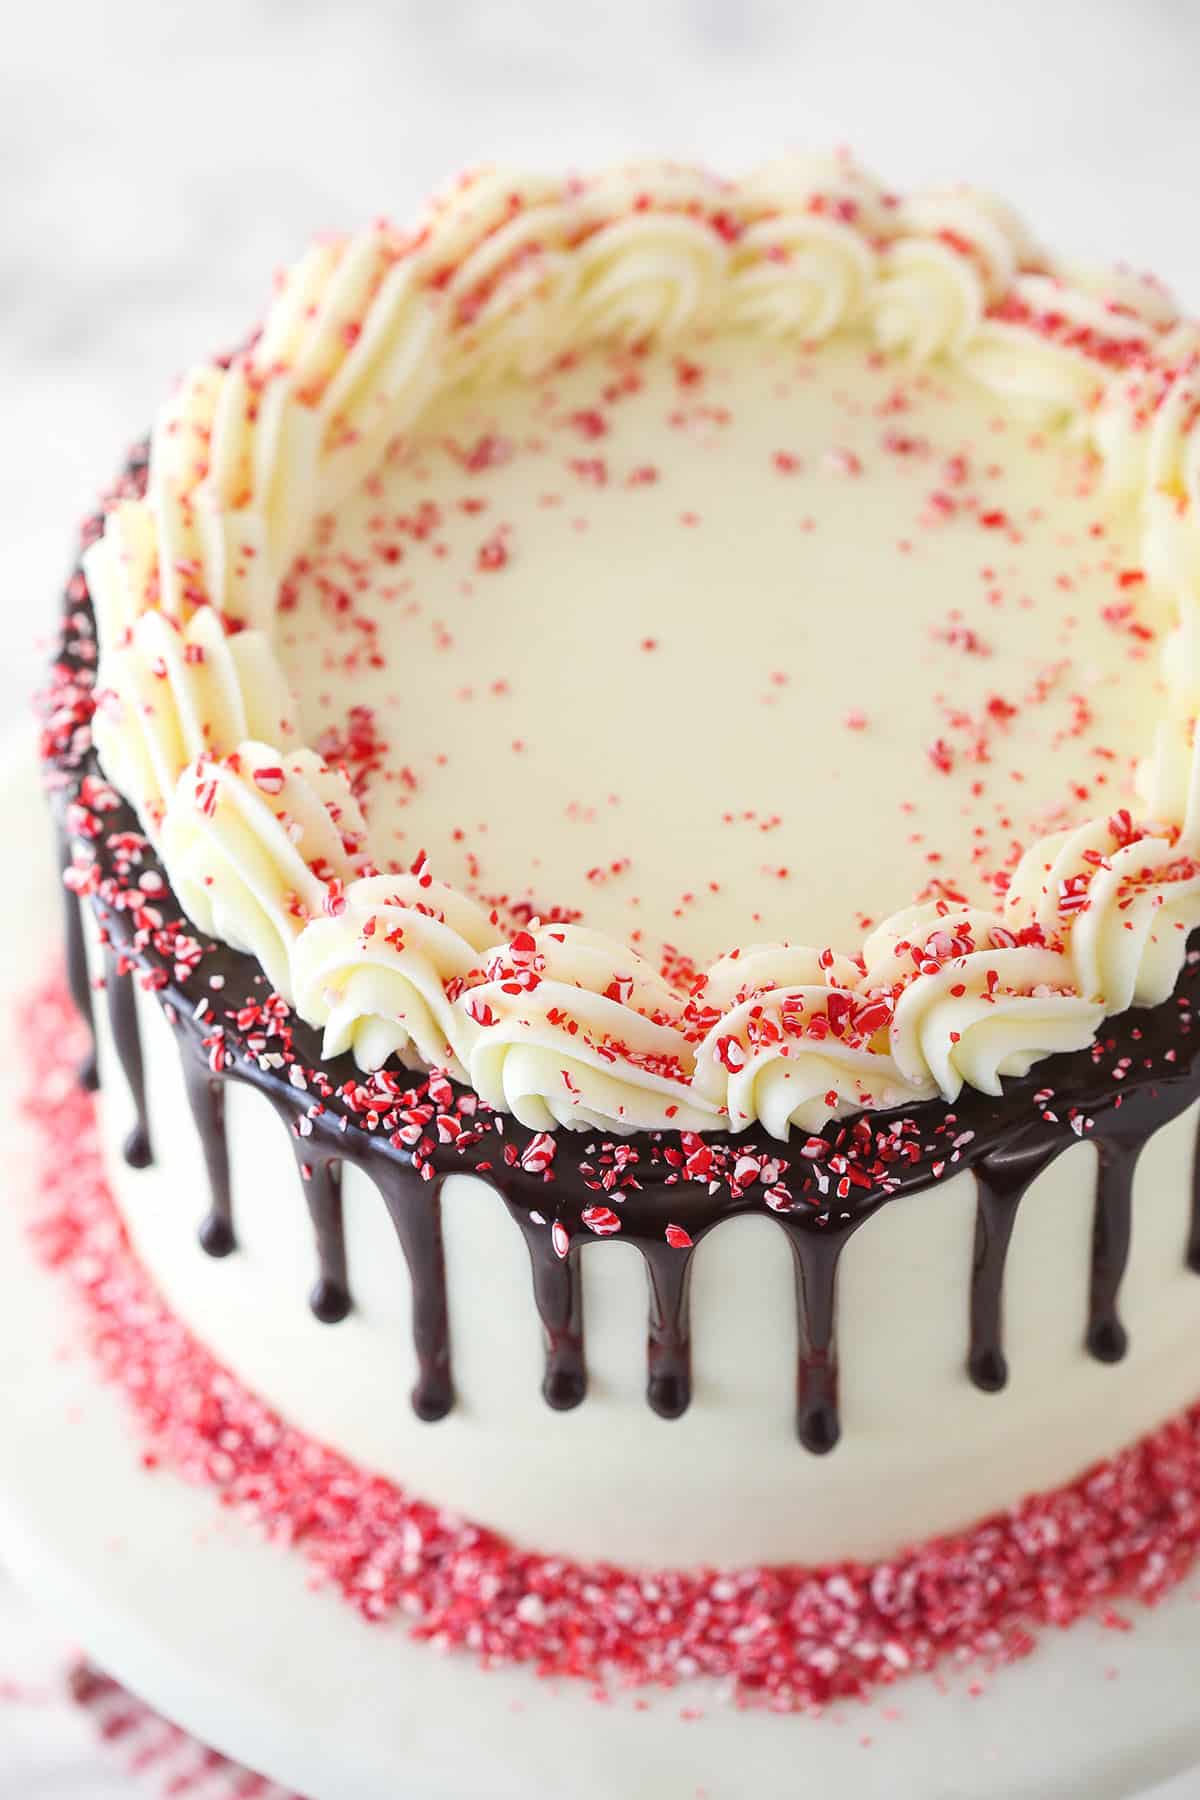 Overhead image of chocolate peppermint layer cake on a cake stand.